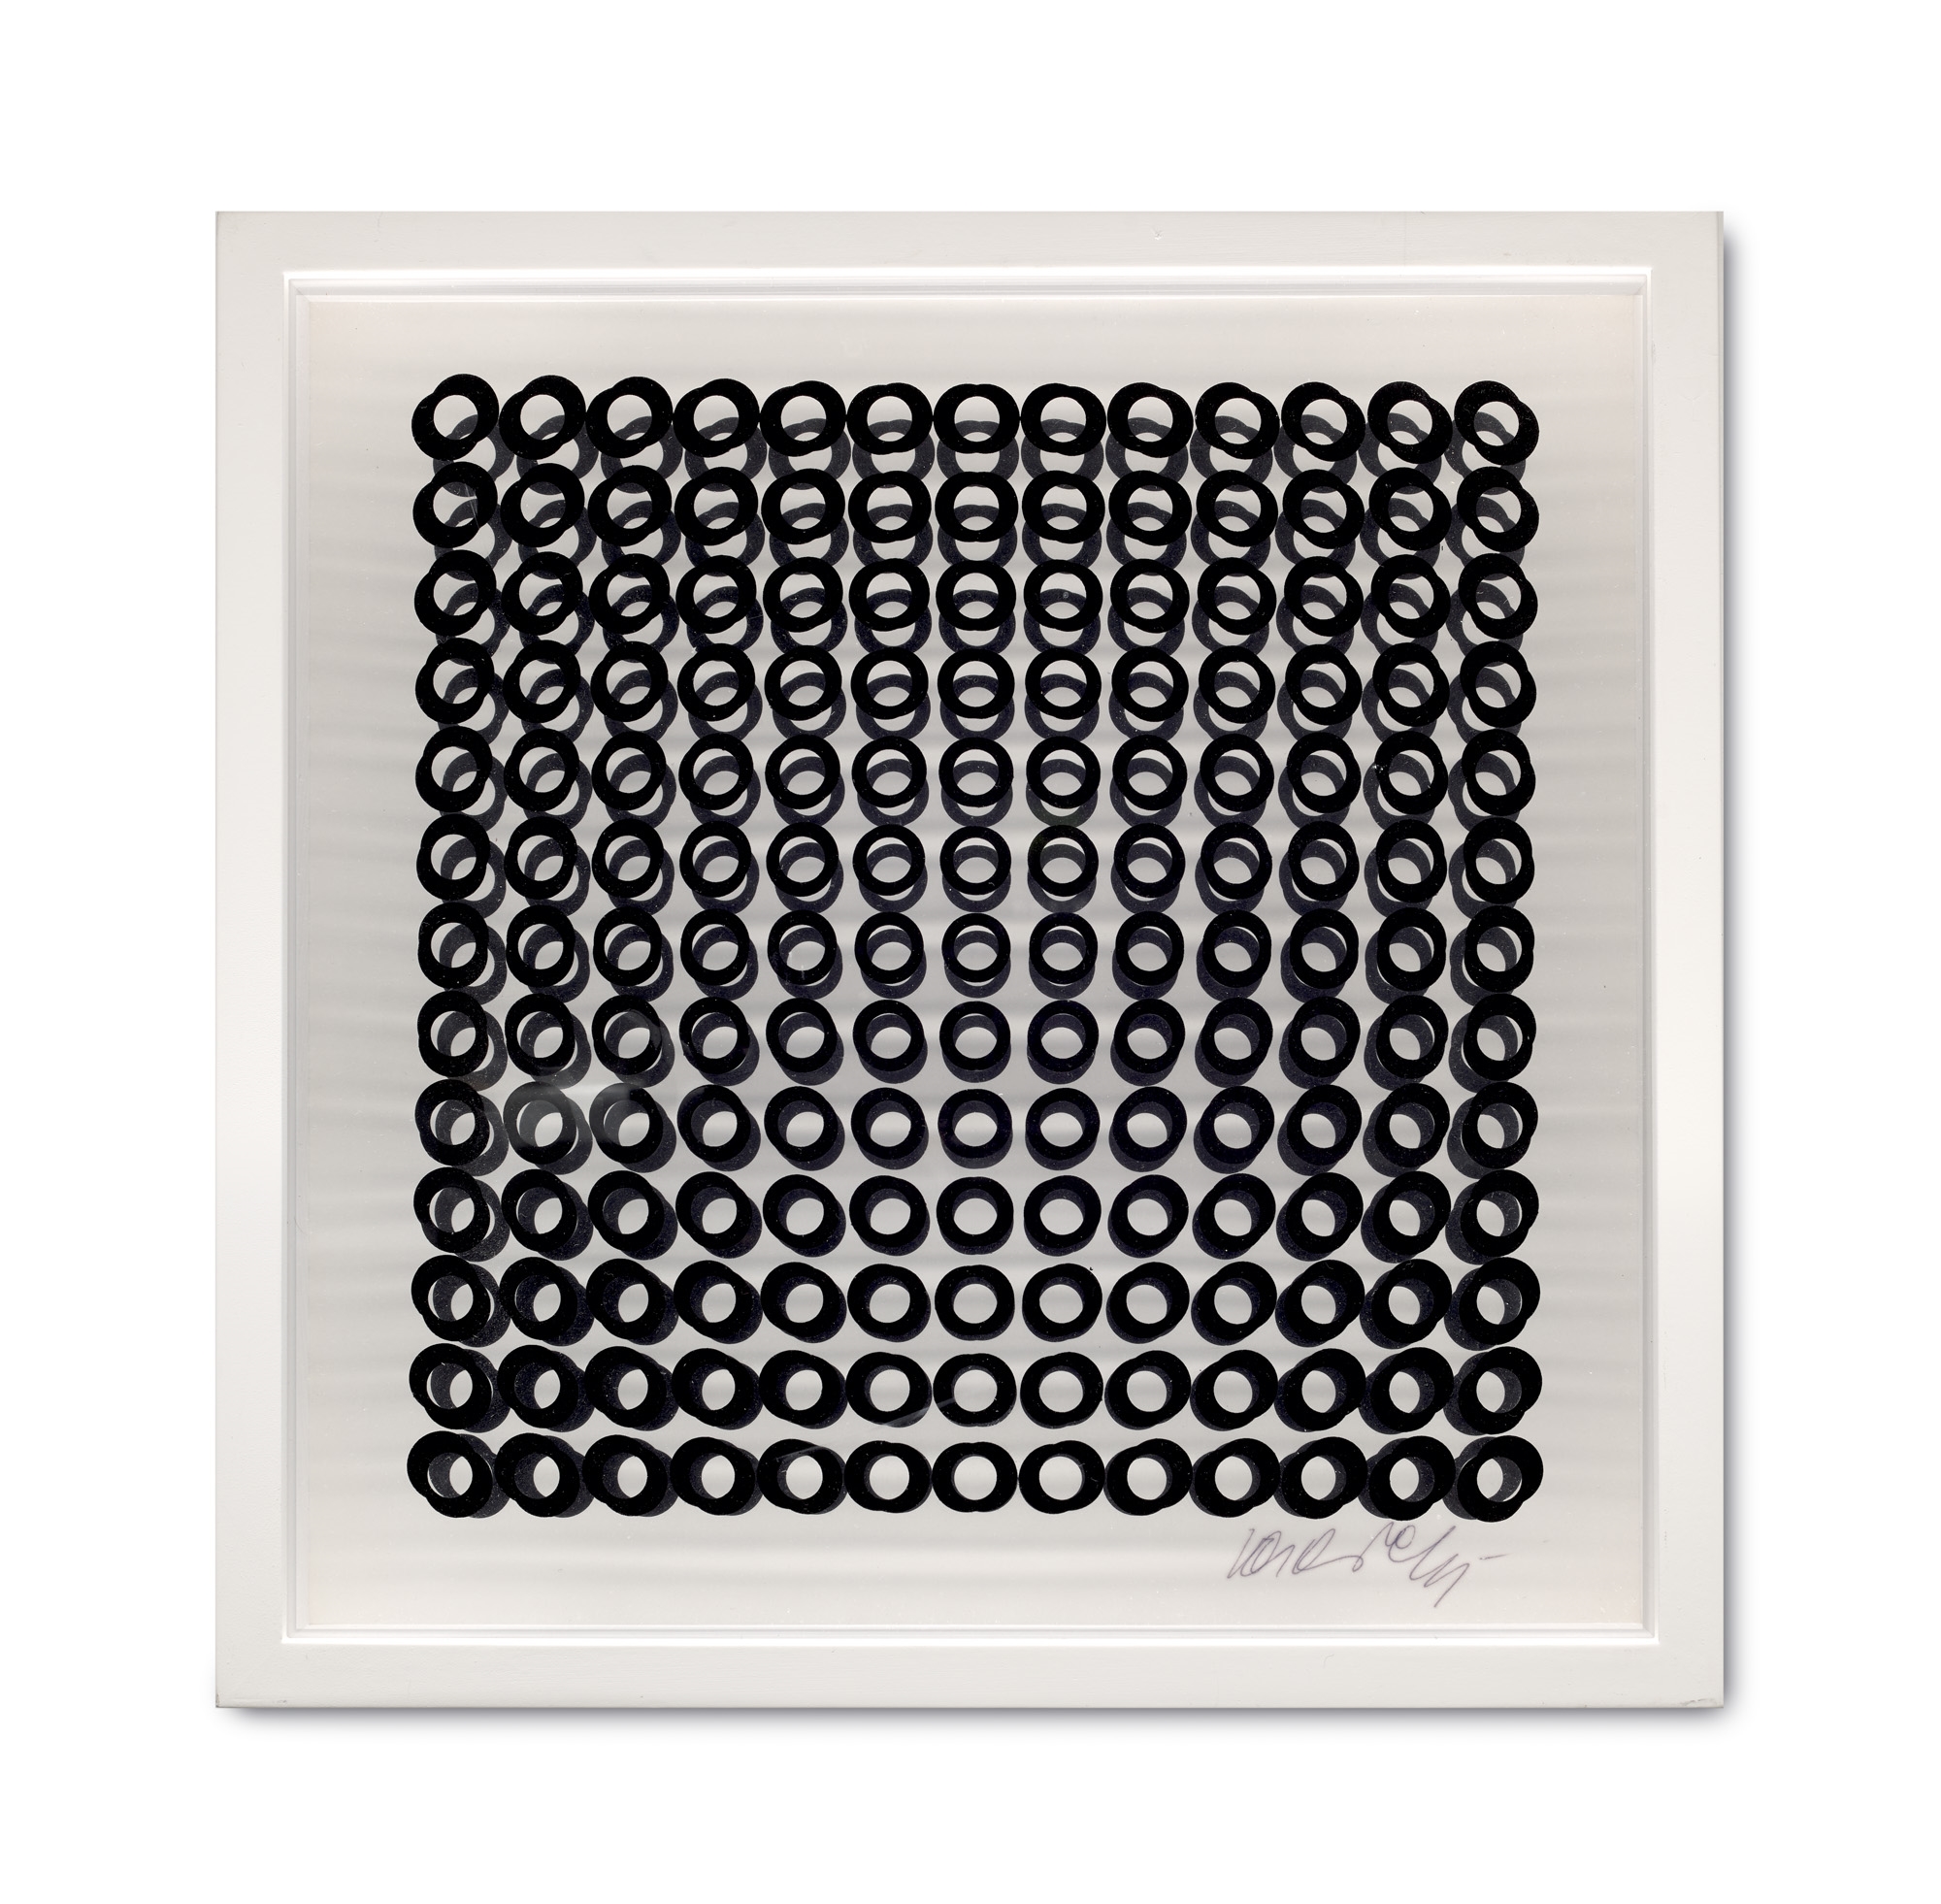 Artwork by Victor Vasarely, Oeuvres Profondes Cinetiques, Made of silkscreens